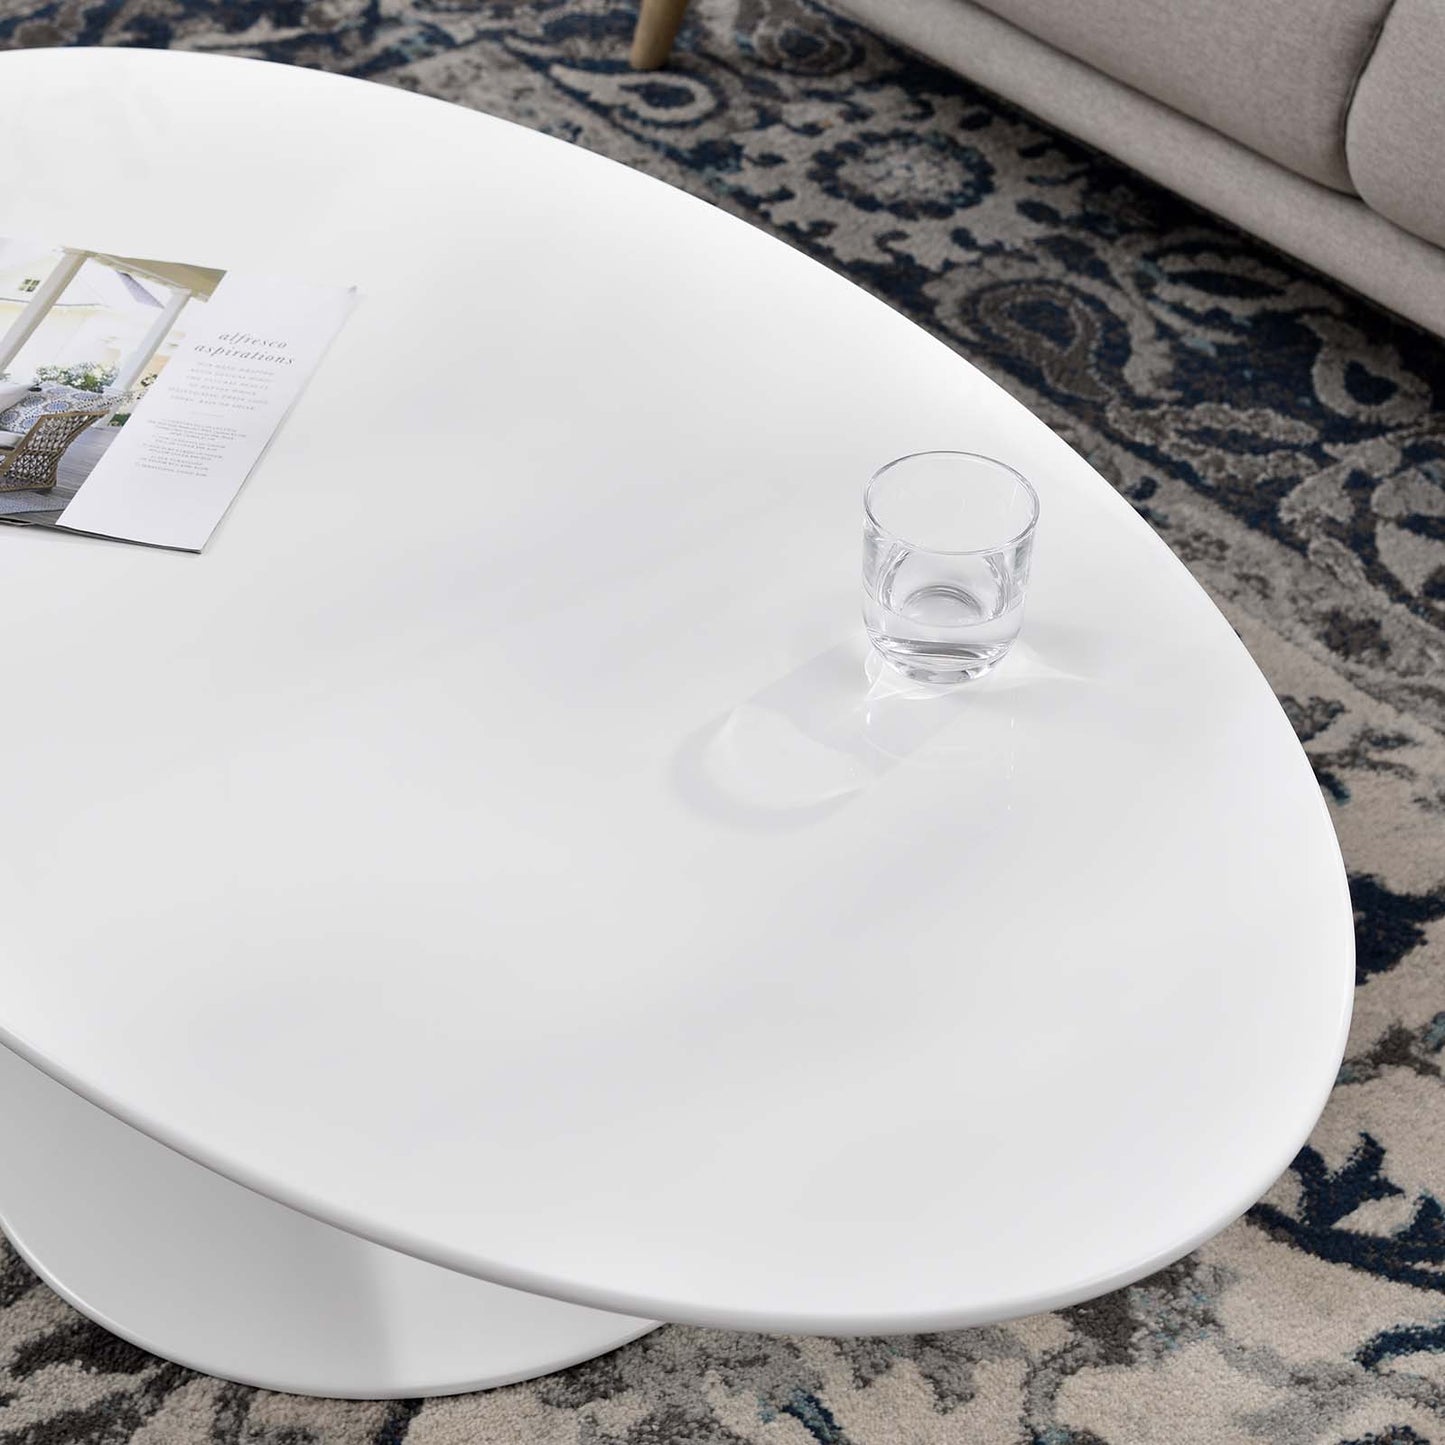 Modway Lippa 48" Oval-Shaped Wood Top Coffee Table in White - EEI-2018